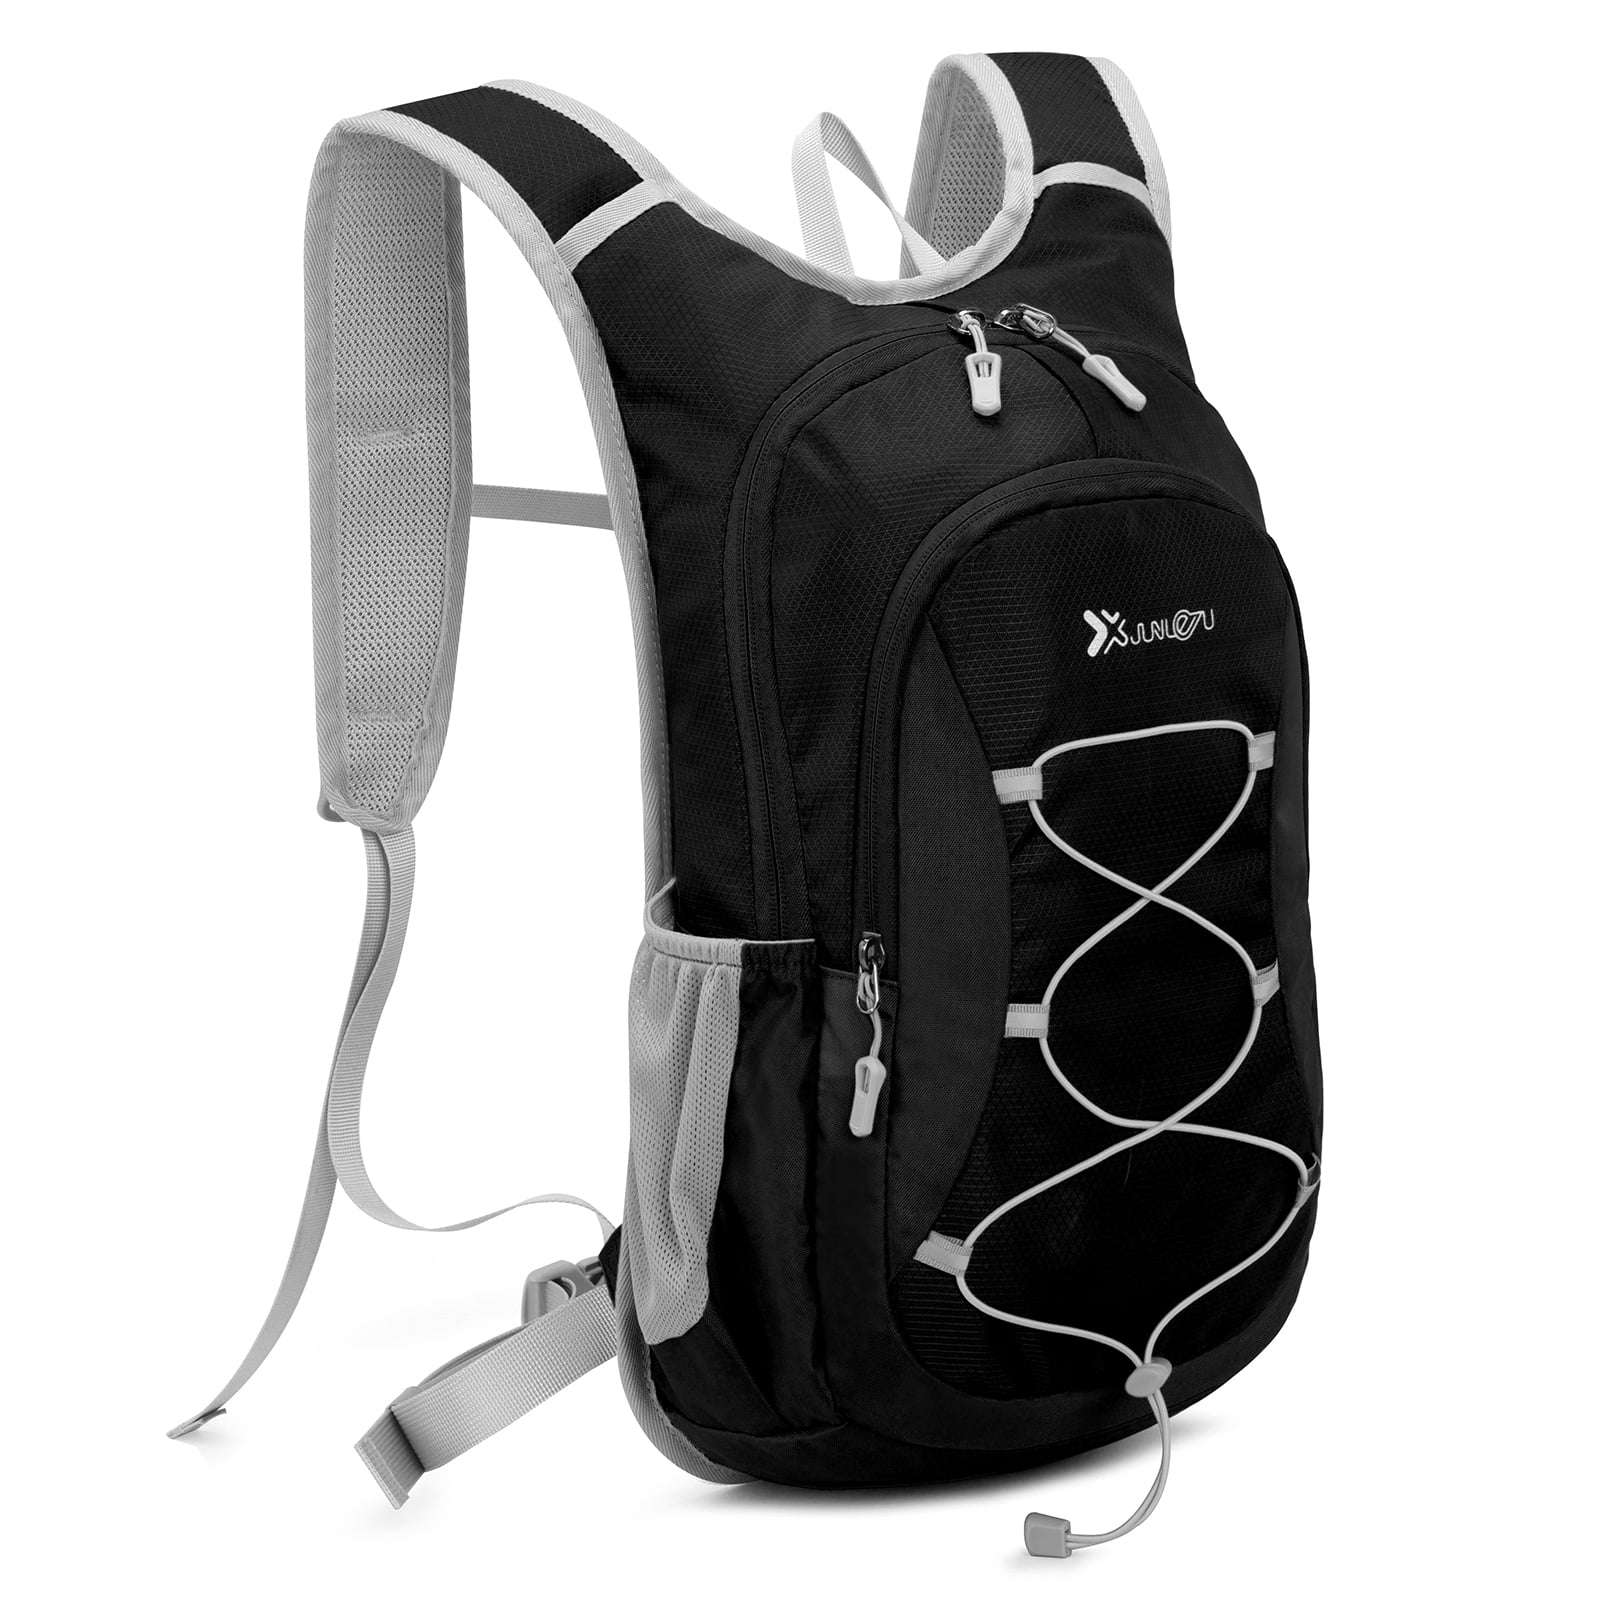 JUNLETU Hydration Backpack with BPA Free Bladder Unisex Water Resistant Durable Light Weight Adjustable Sizing 